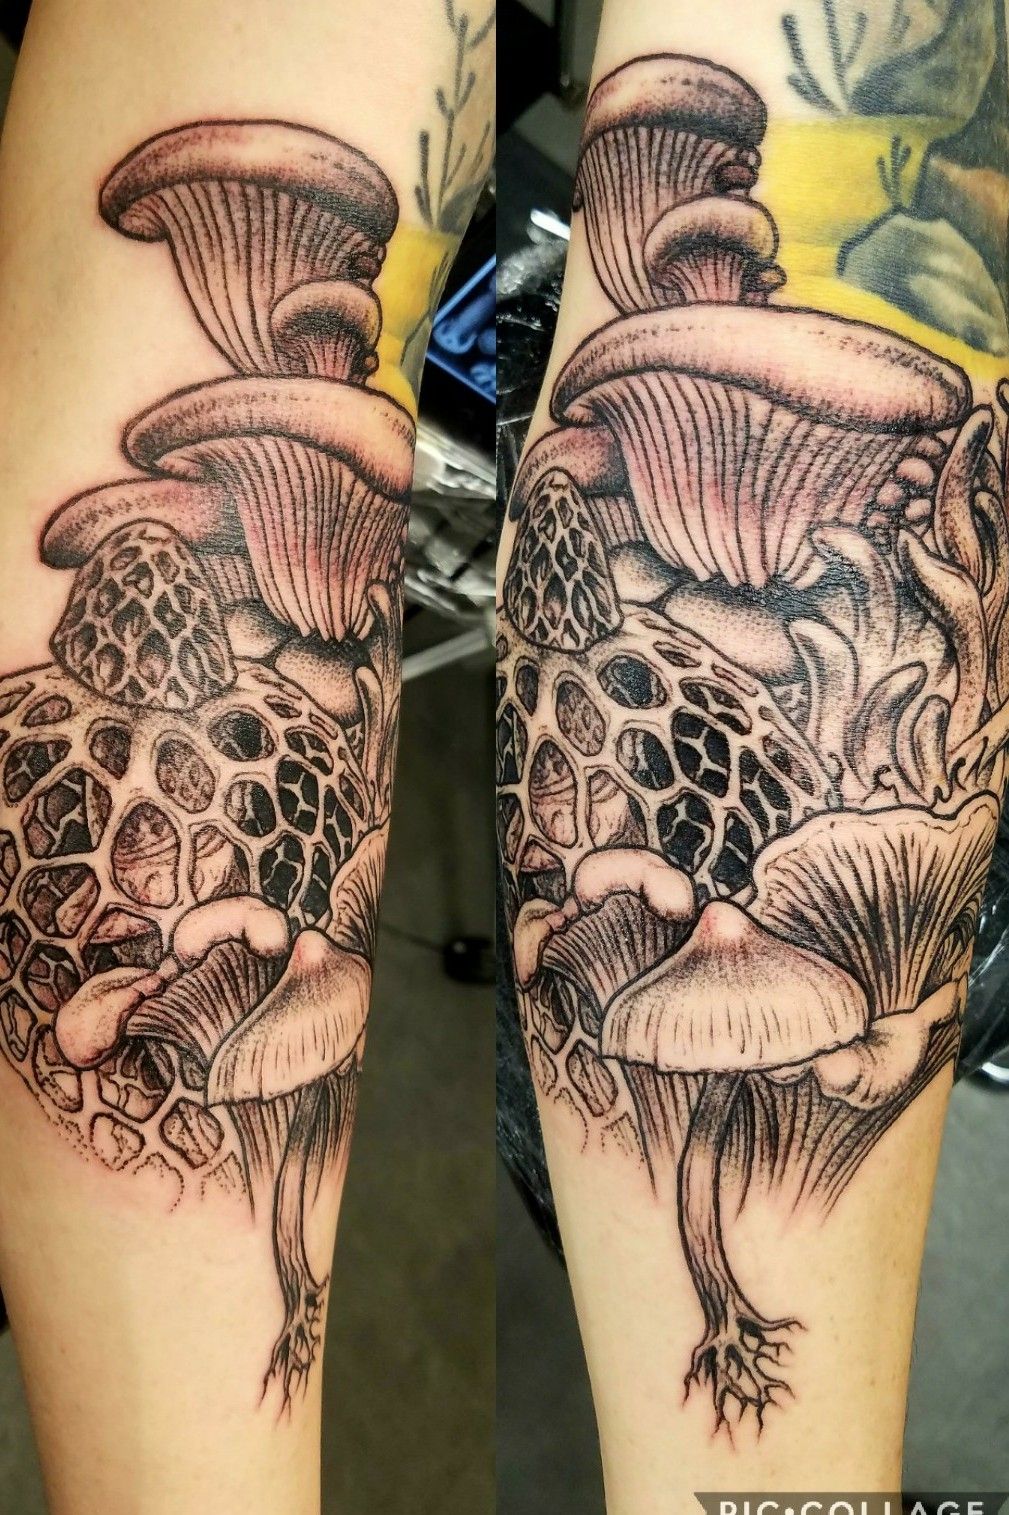 If you are fan of mushrooms why not get tattoos like these